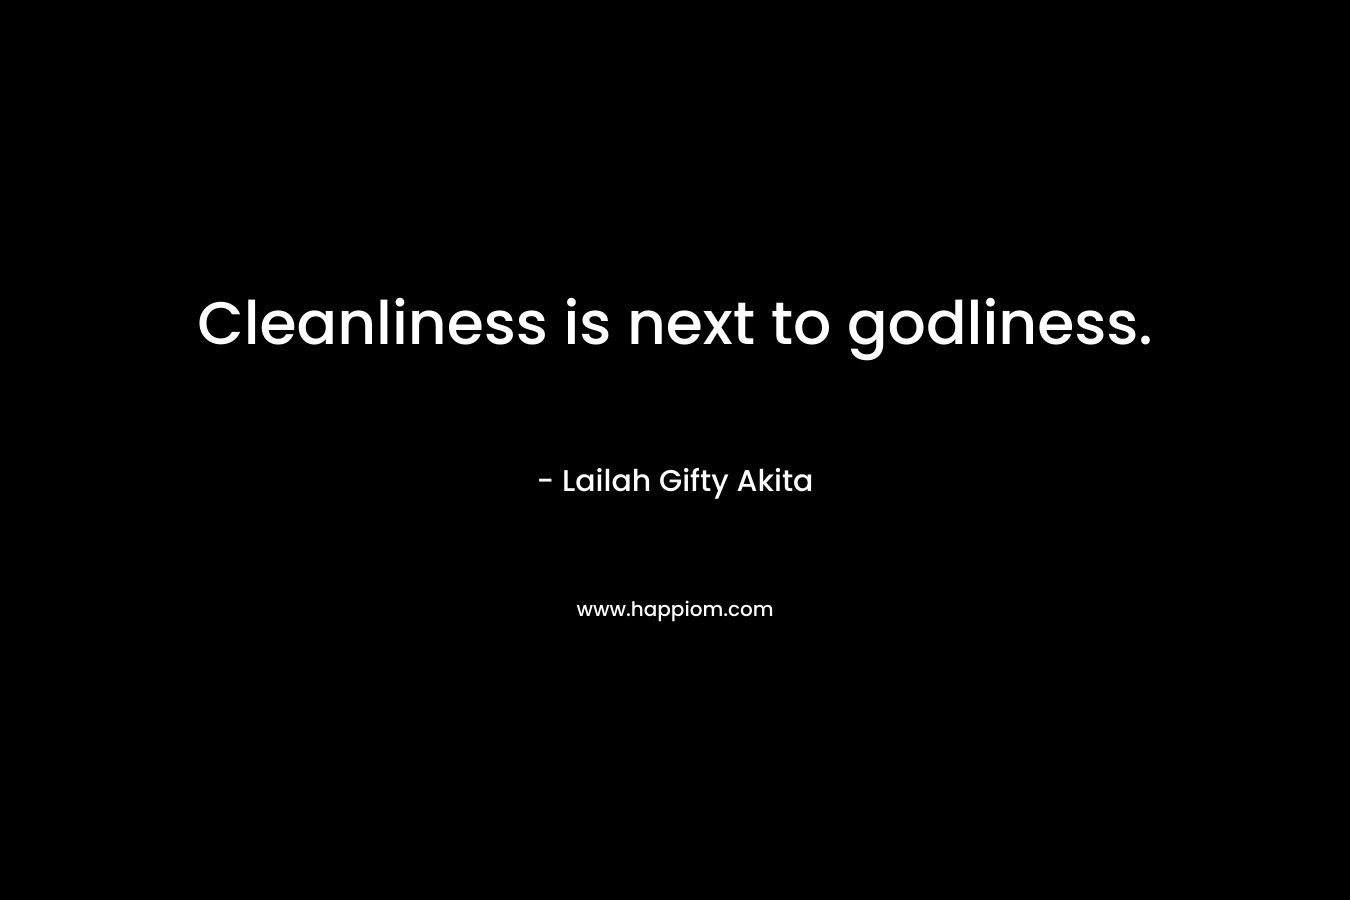 Cleanliness is next to godliness.